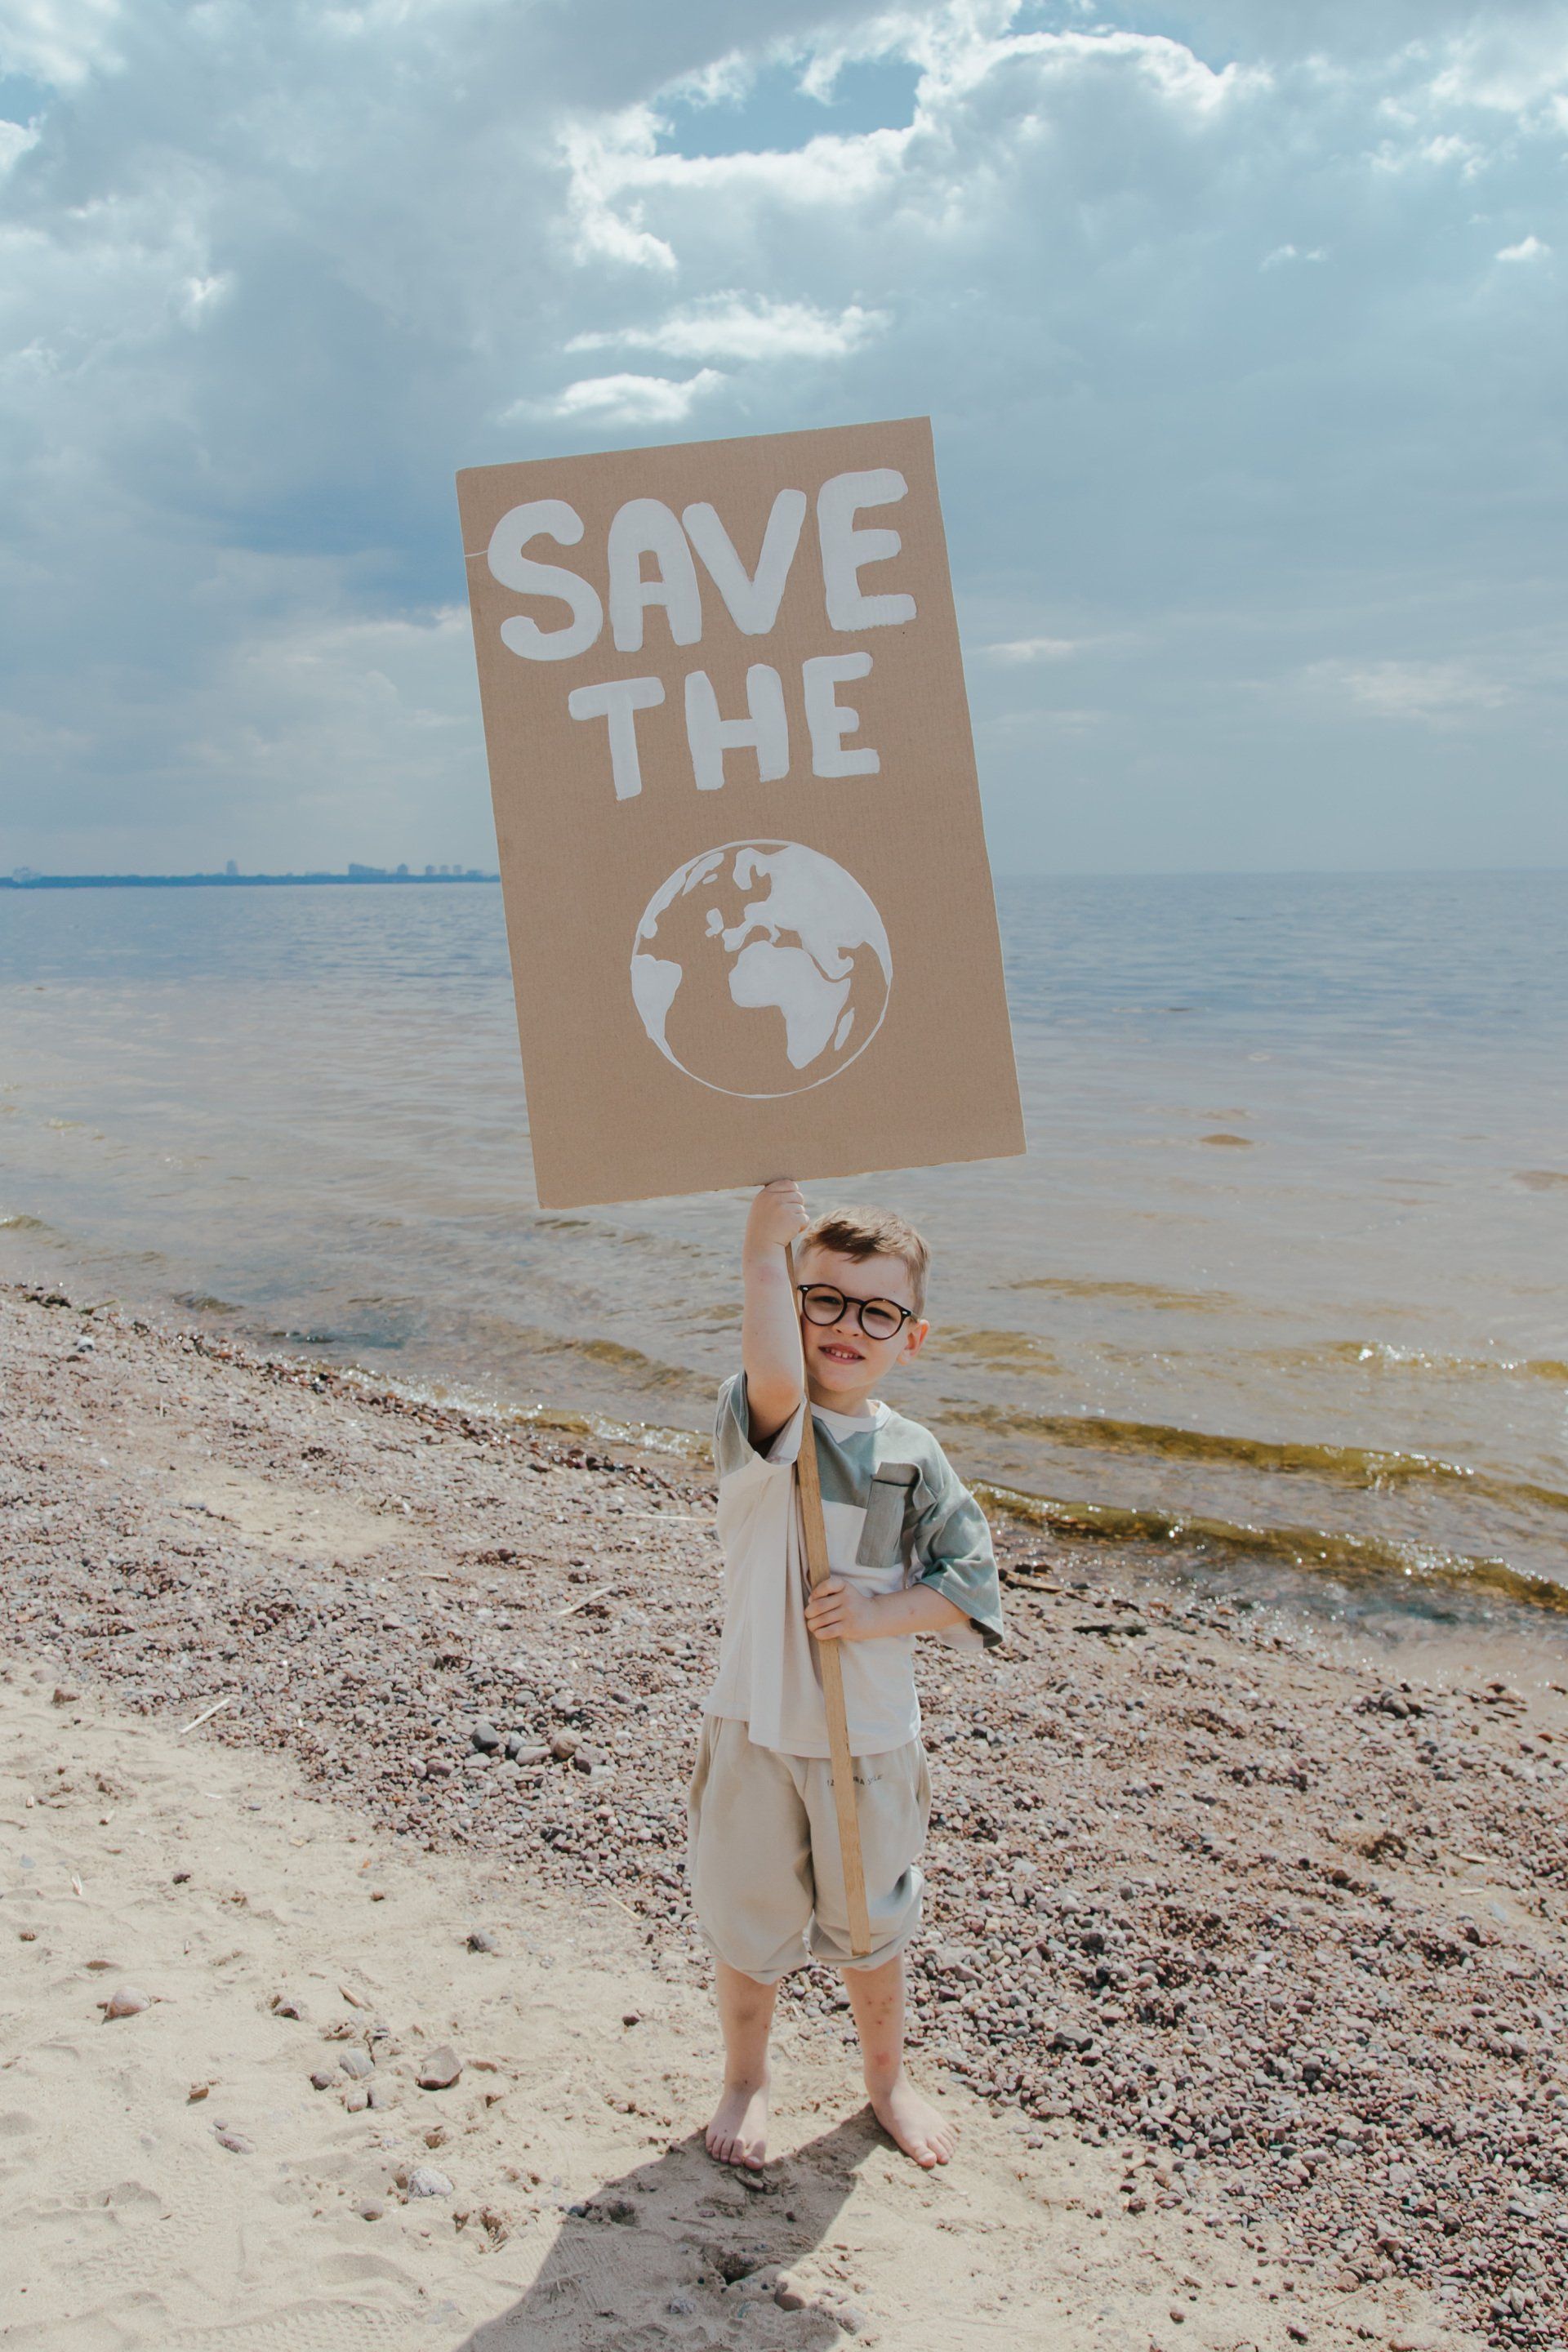 Little boy on a beach holding save the planet sign